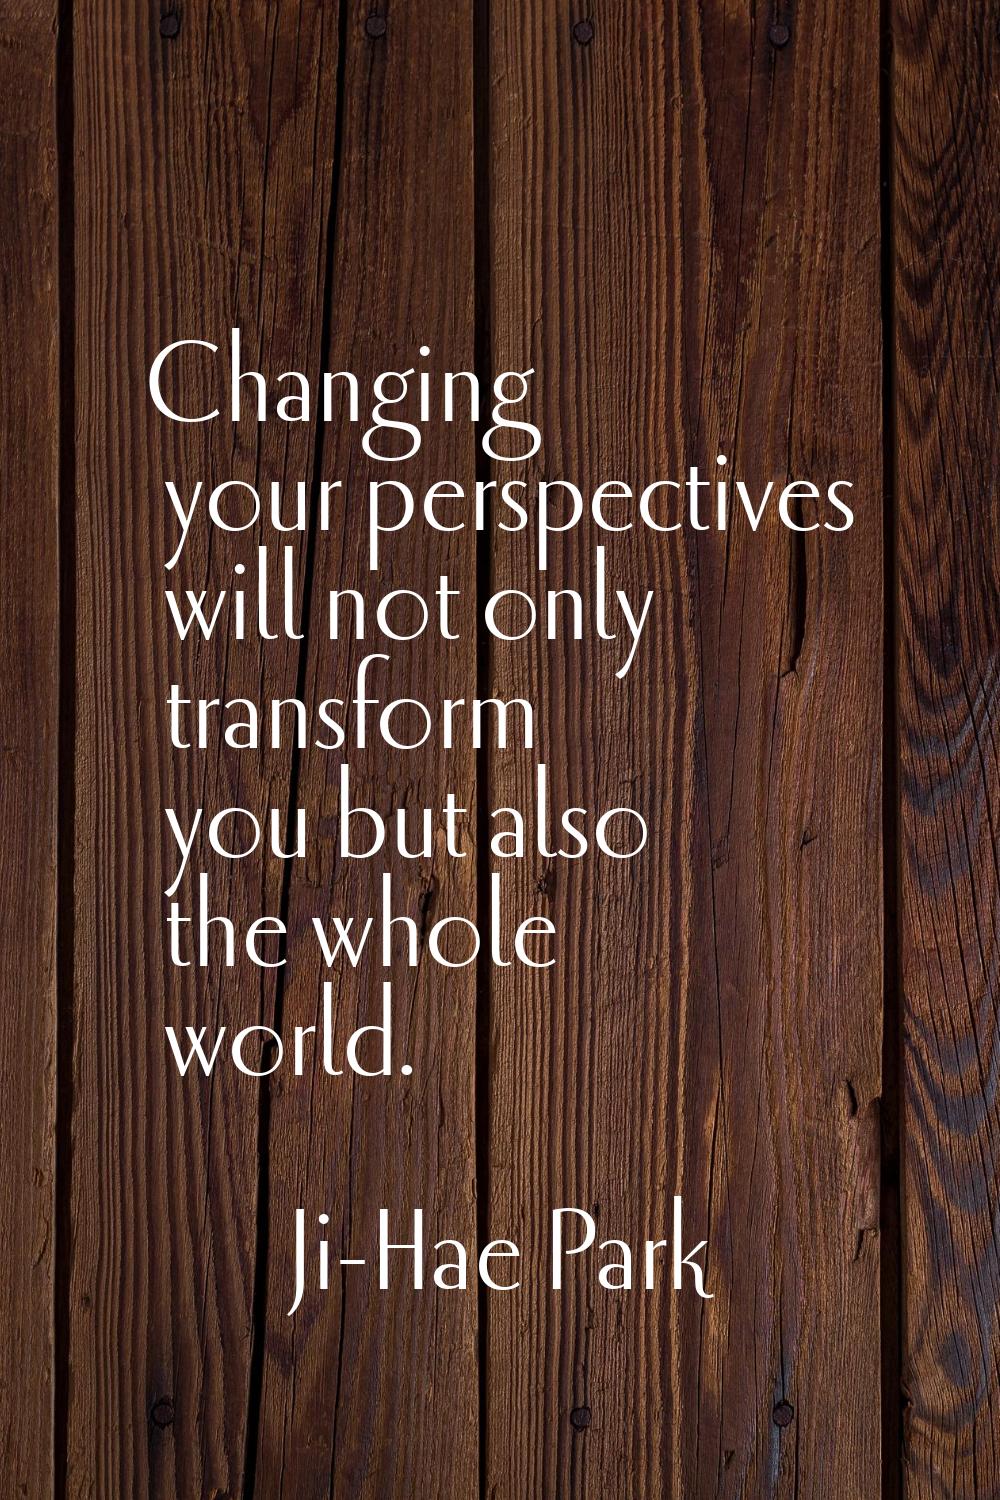 Changing your perspectives will not only transform you but also the whole world.